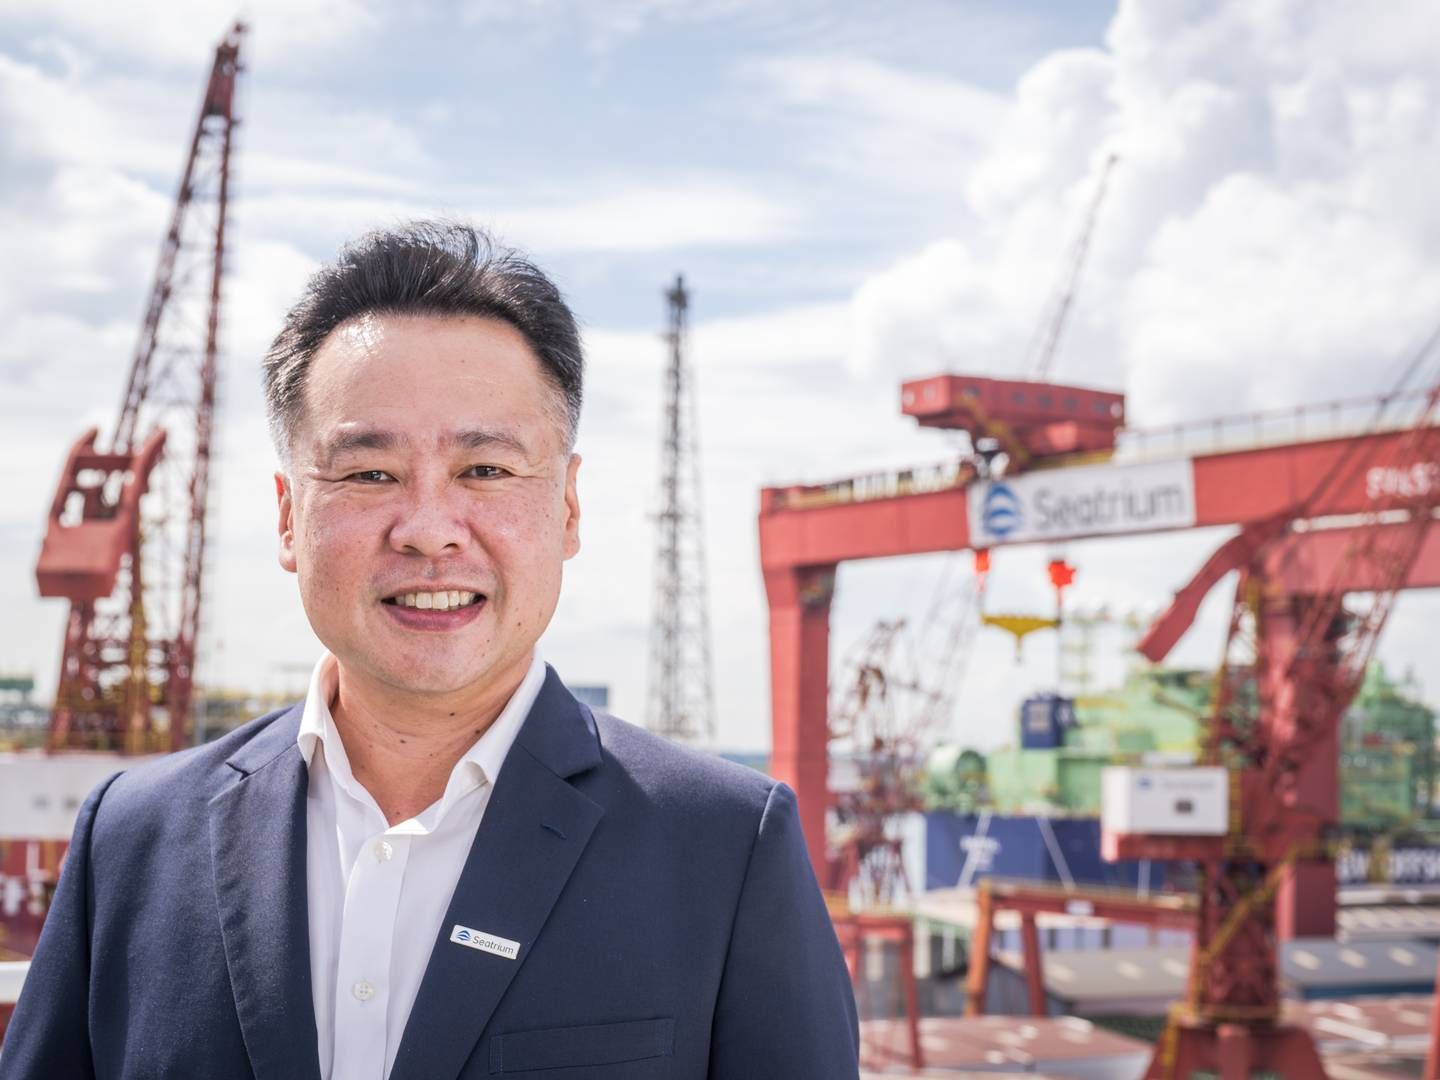 ”The footprint that we have unlocked all over the world at Seatrium Group gives our customers a very unique opportunity to take a look at how projects globally can be managed more efficiently,” CEO Chris Ong told ShippingWatch in December. | Photo: Joe Nair